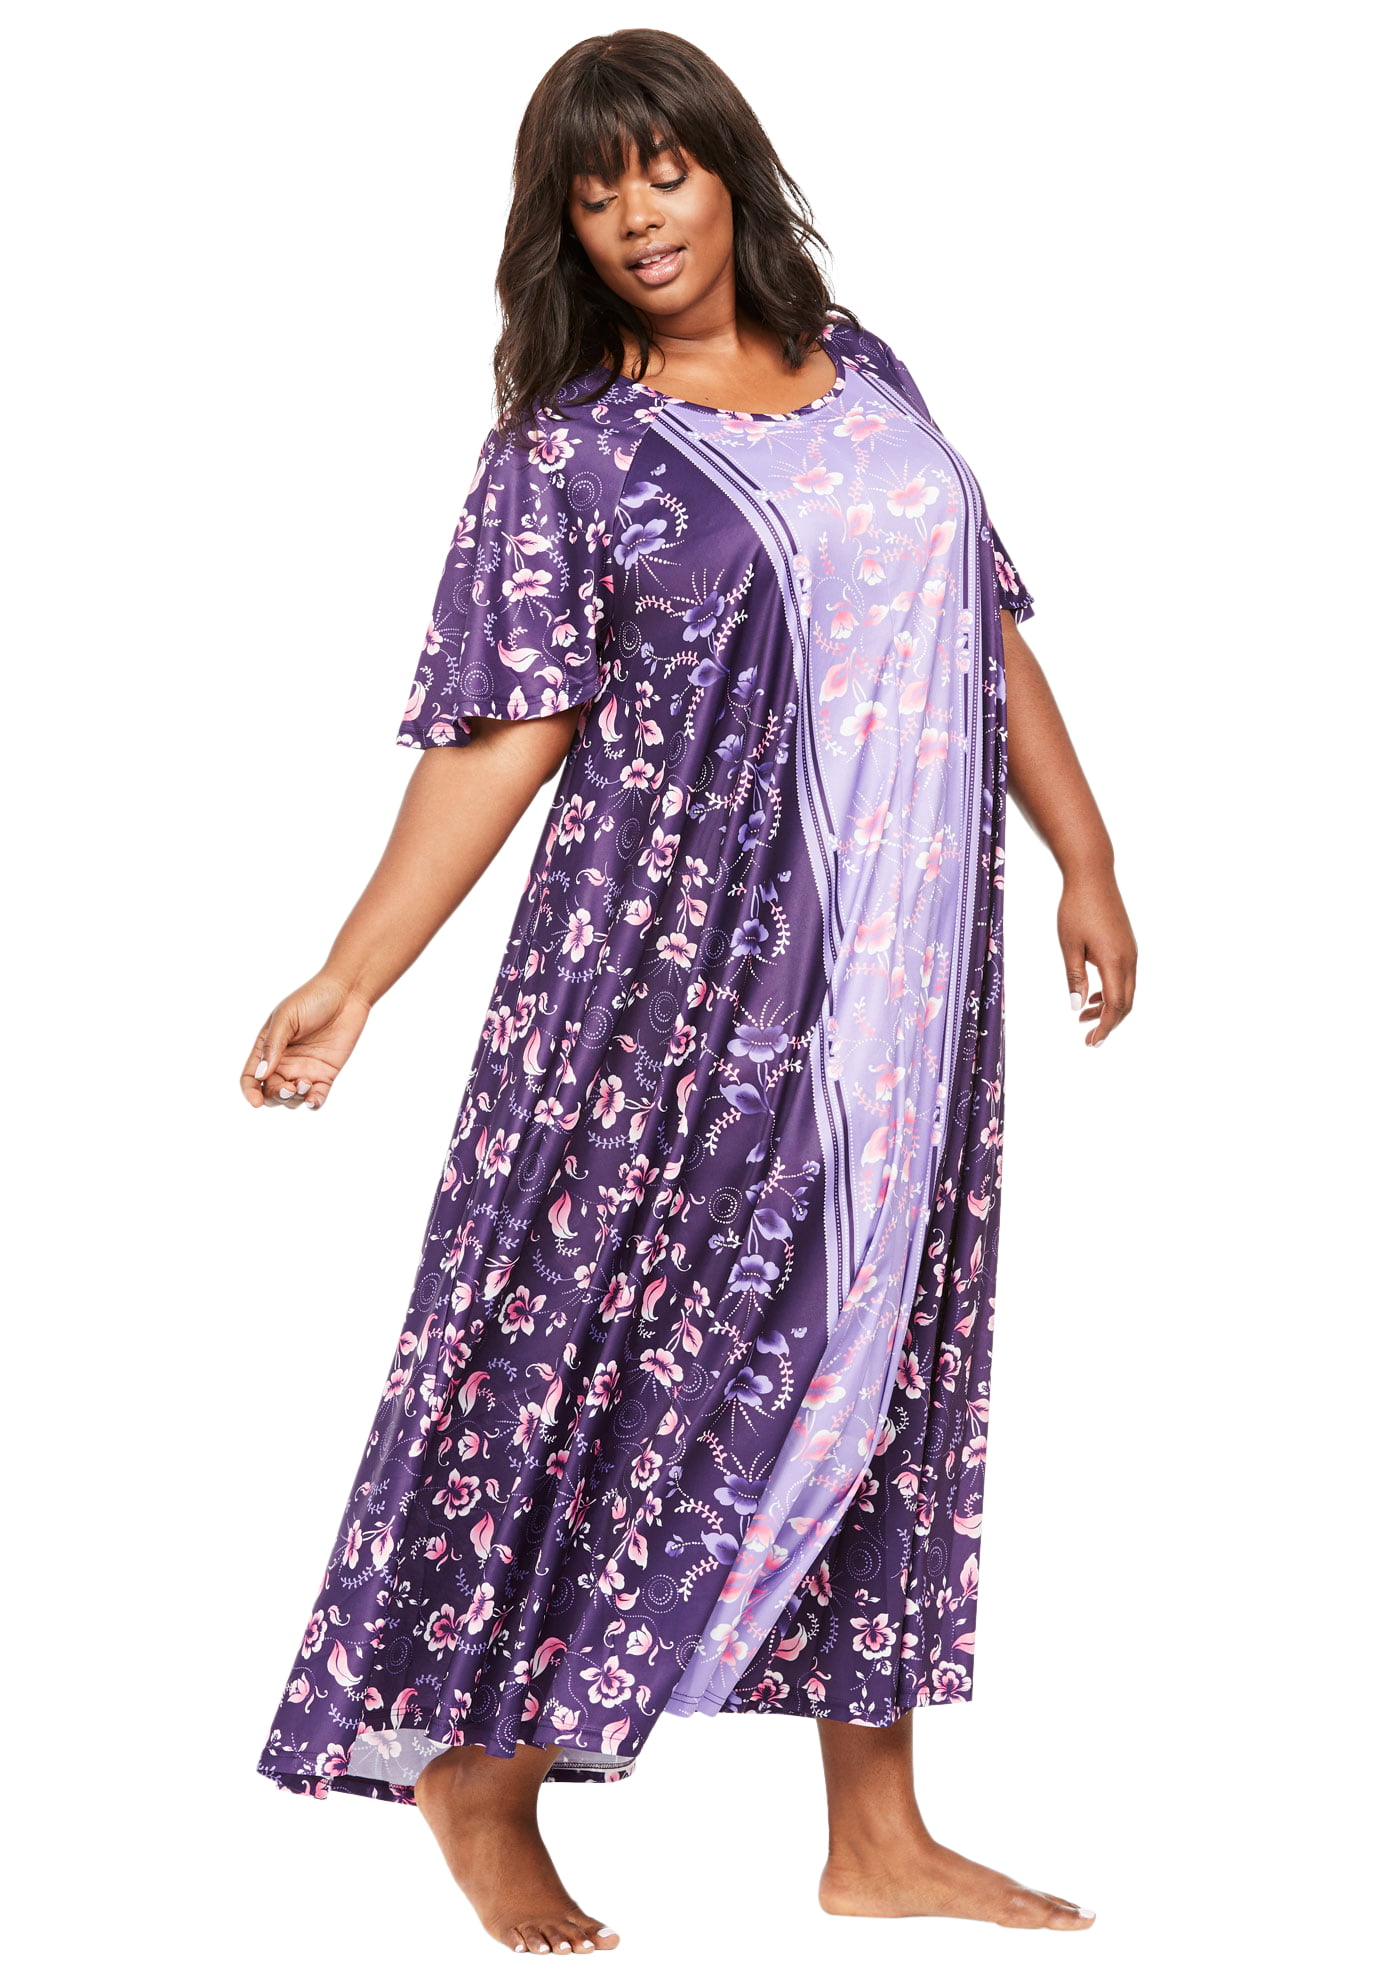 Only Necessities - Only Necessities Women's Plus Size Sweeping Printed ...